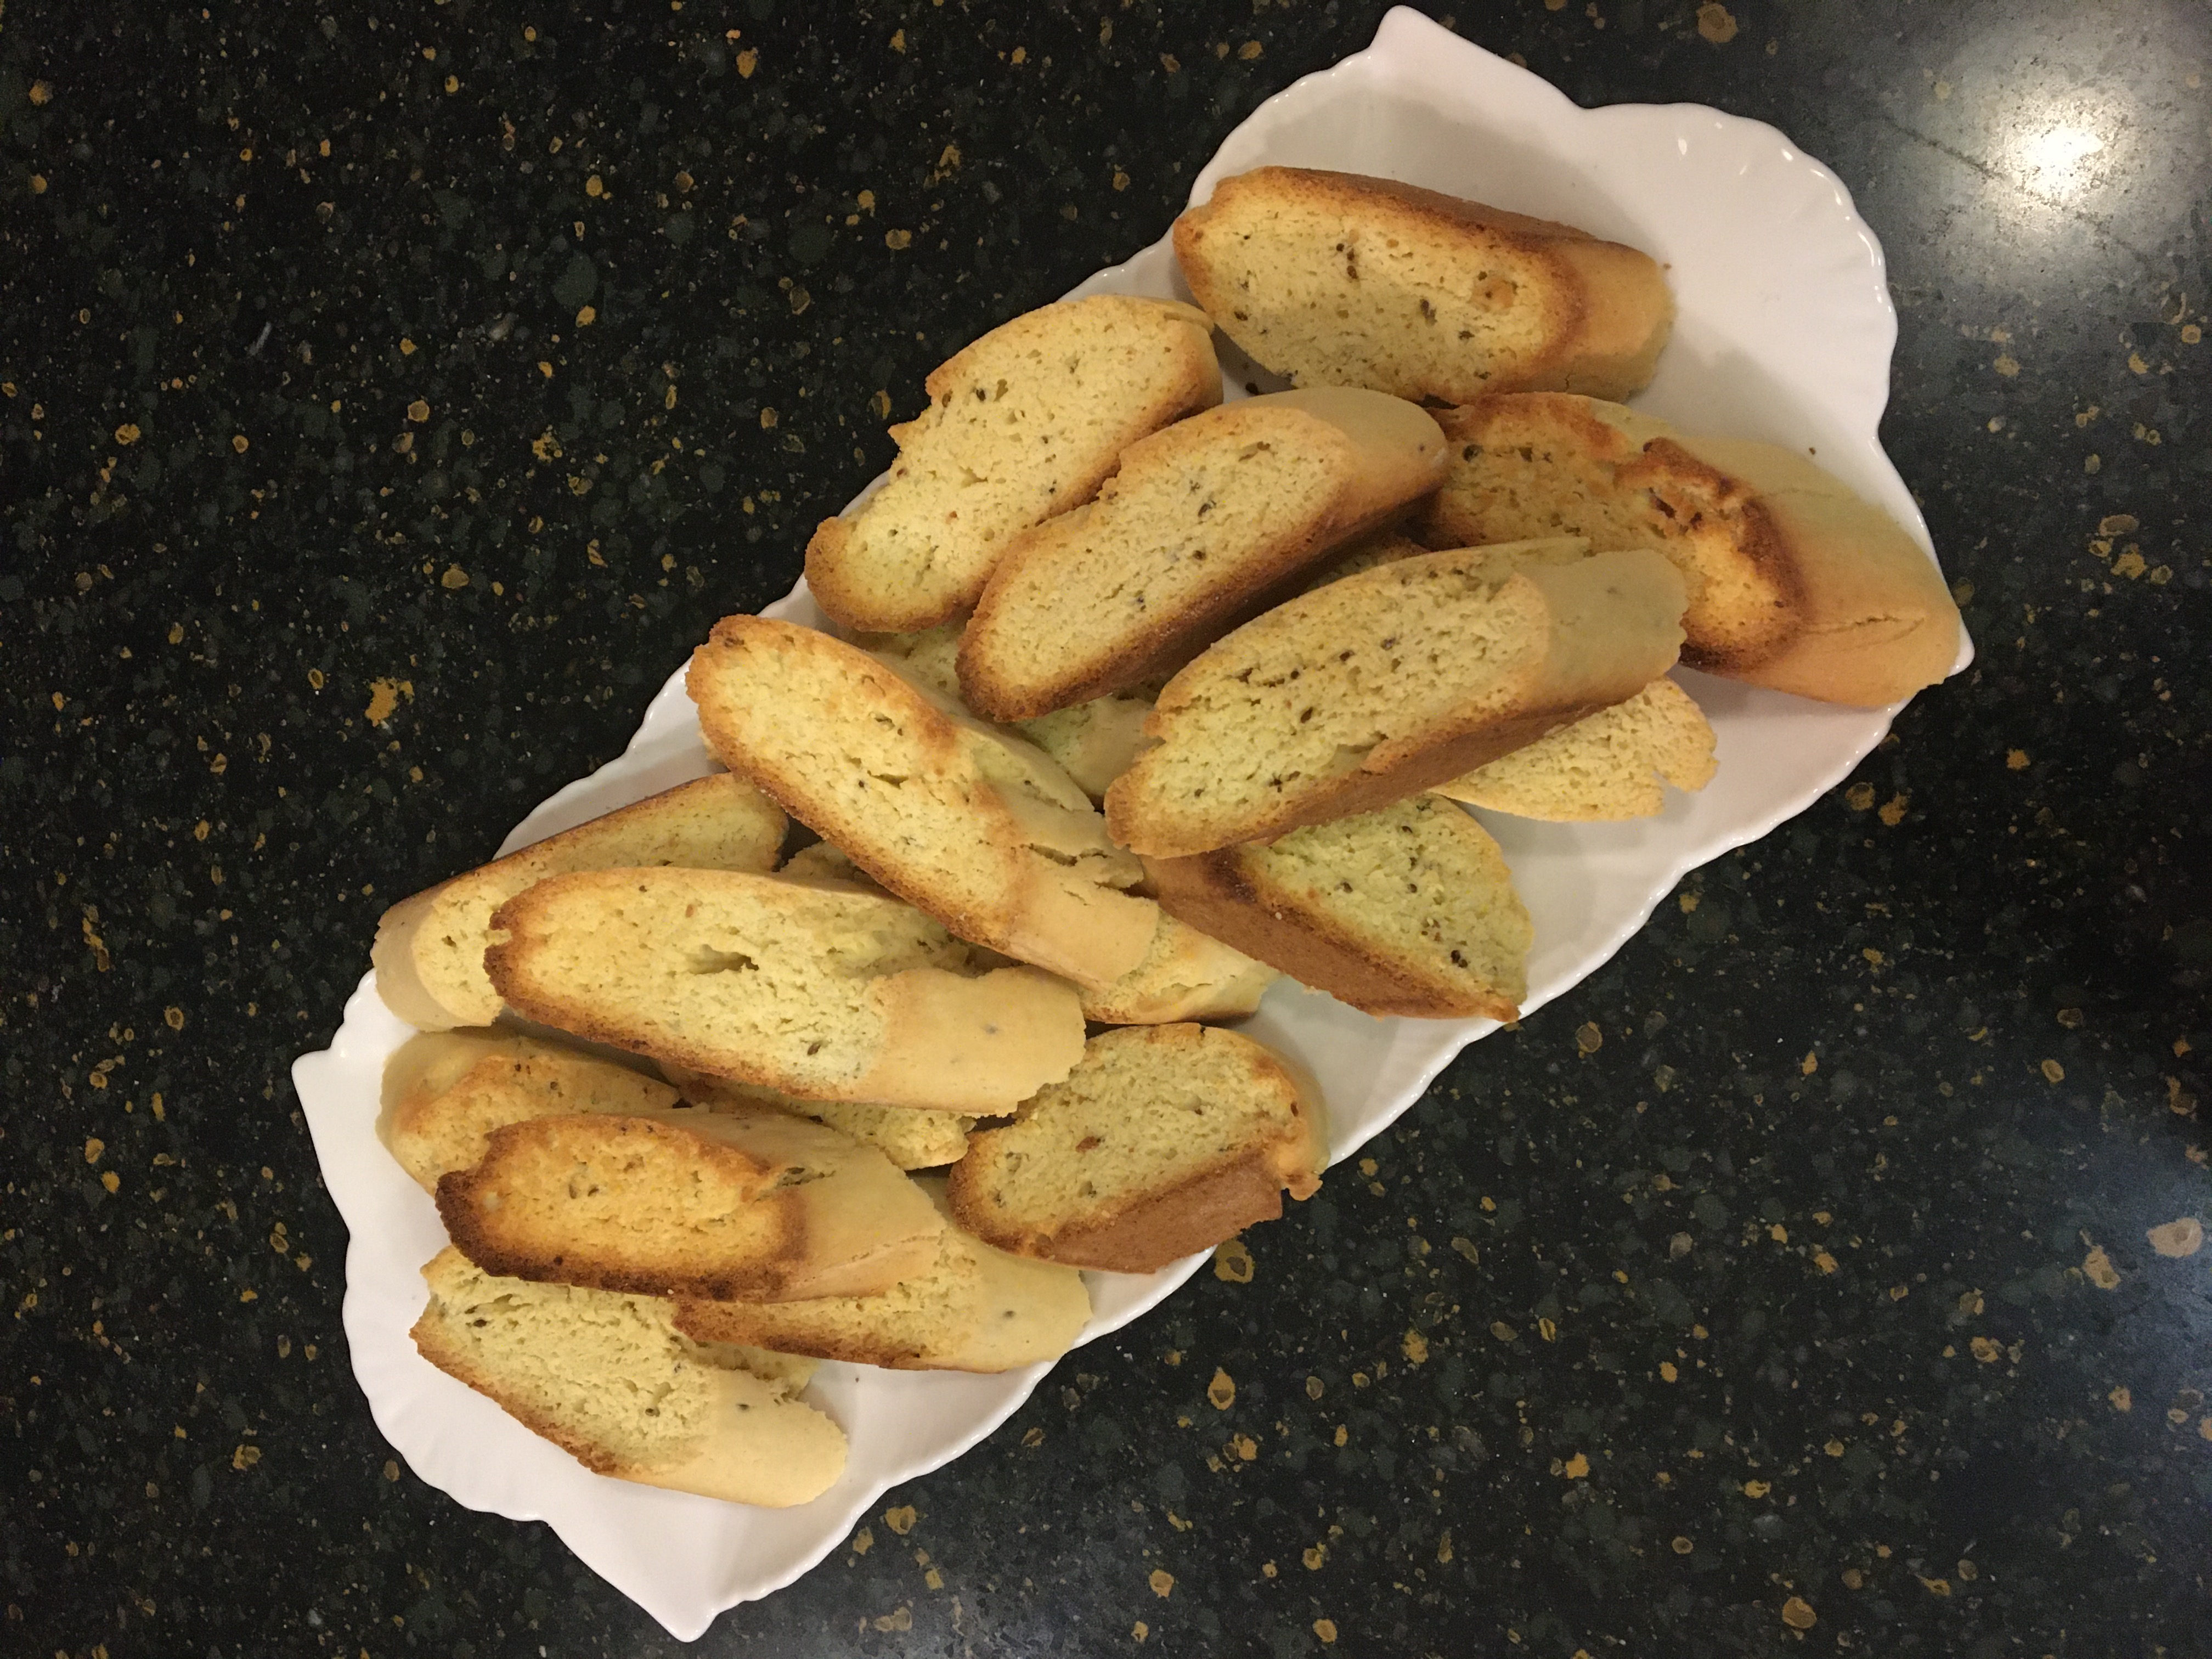 Toasted Biscotti